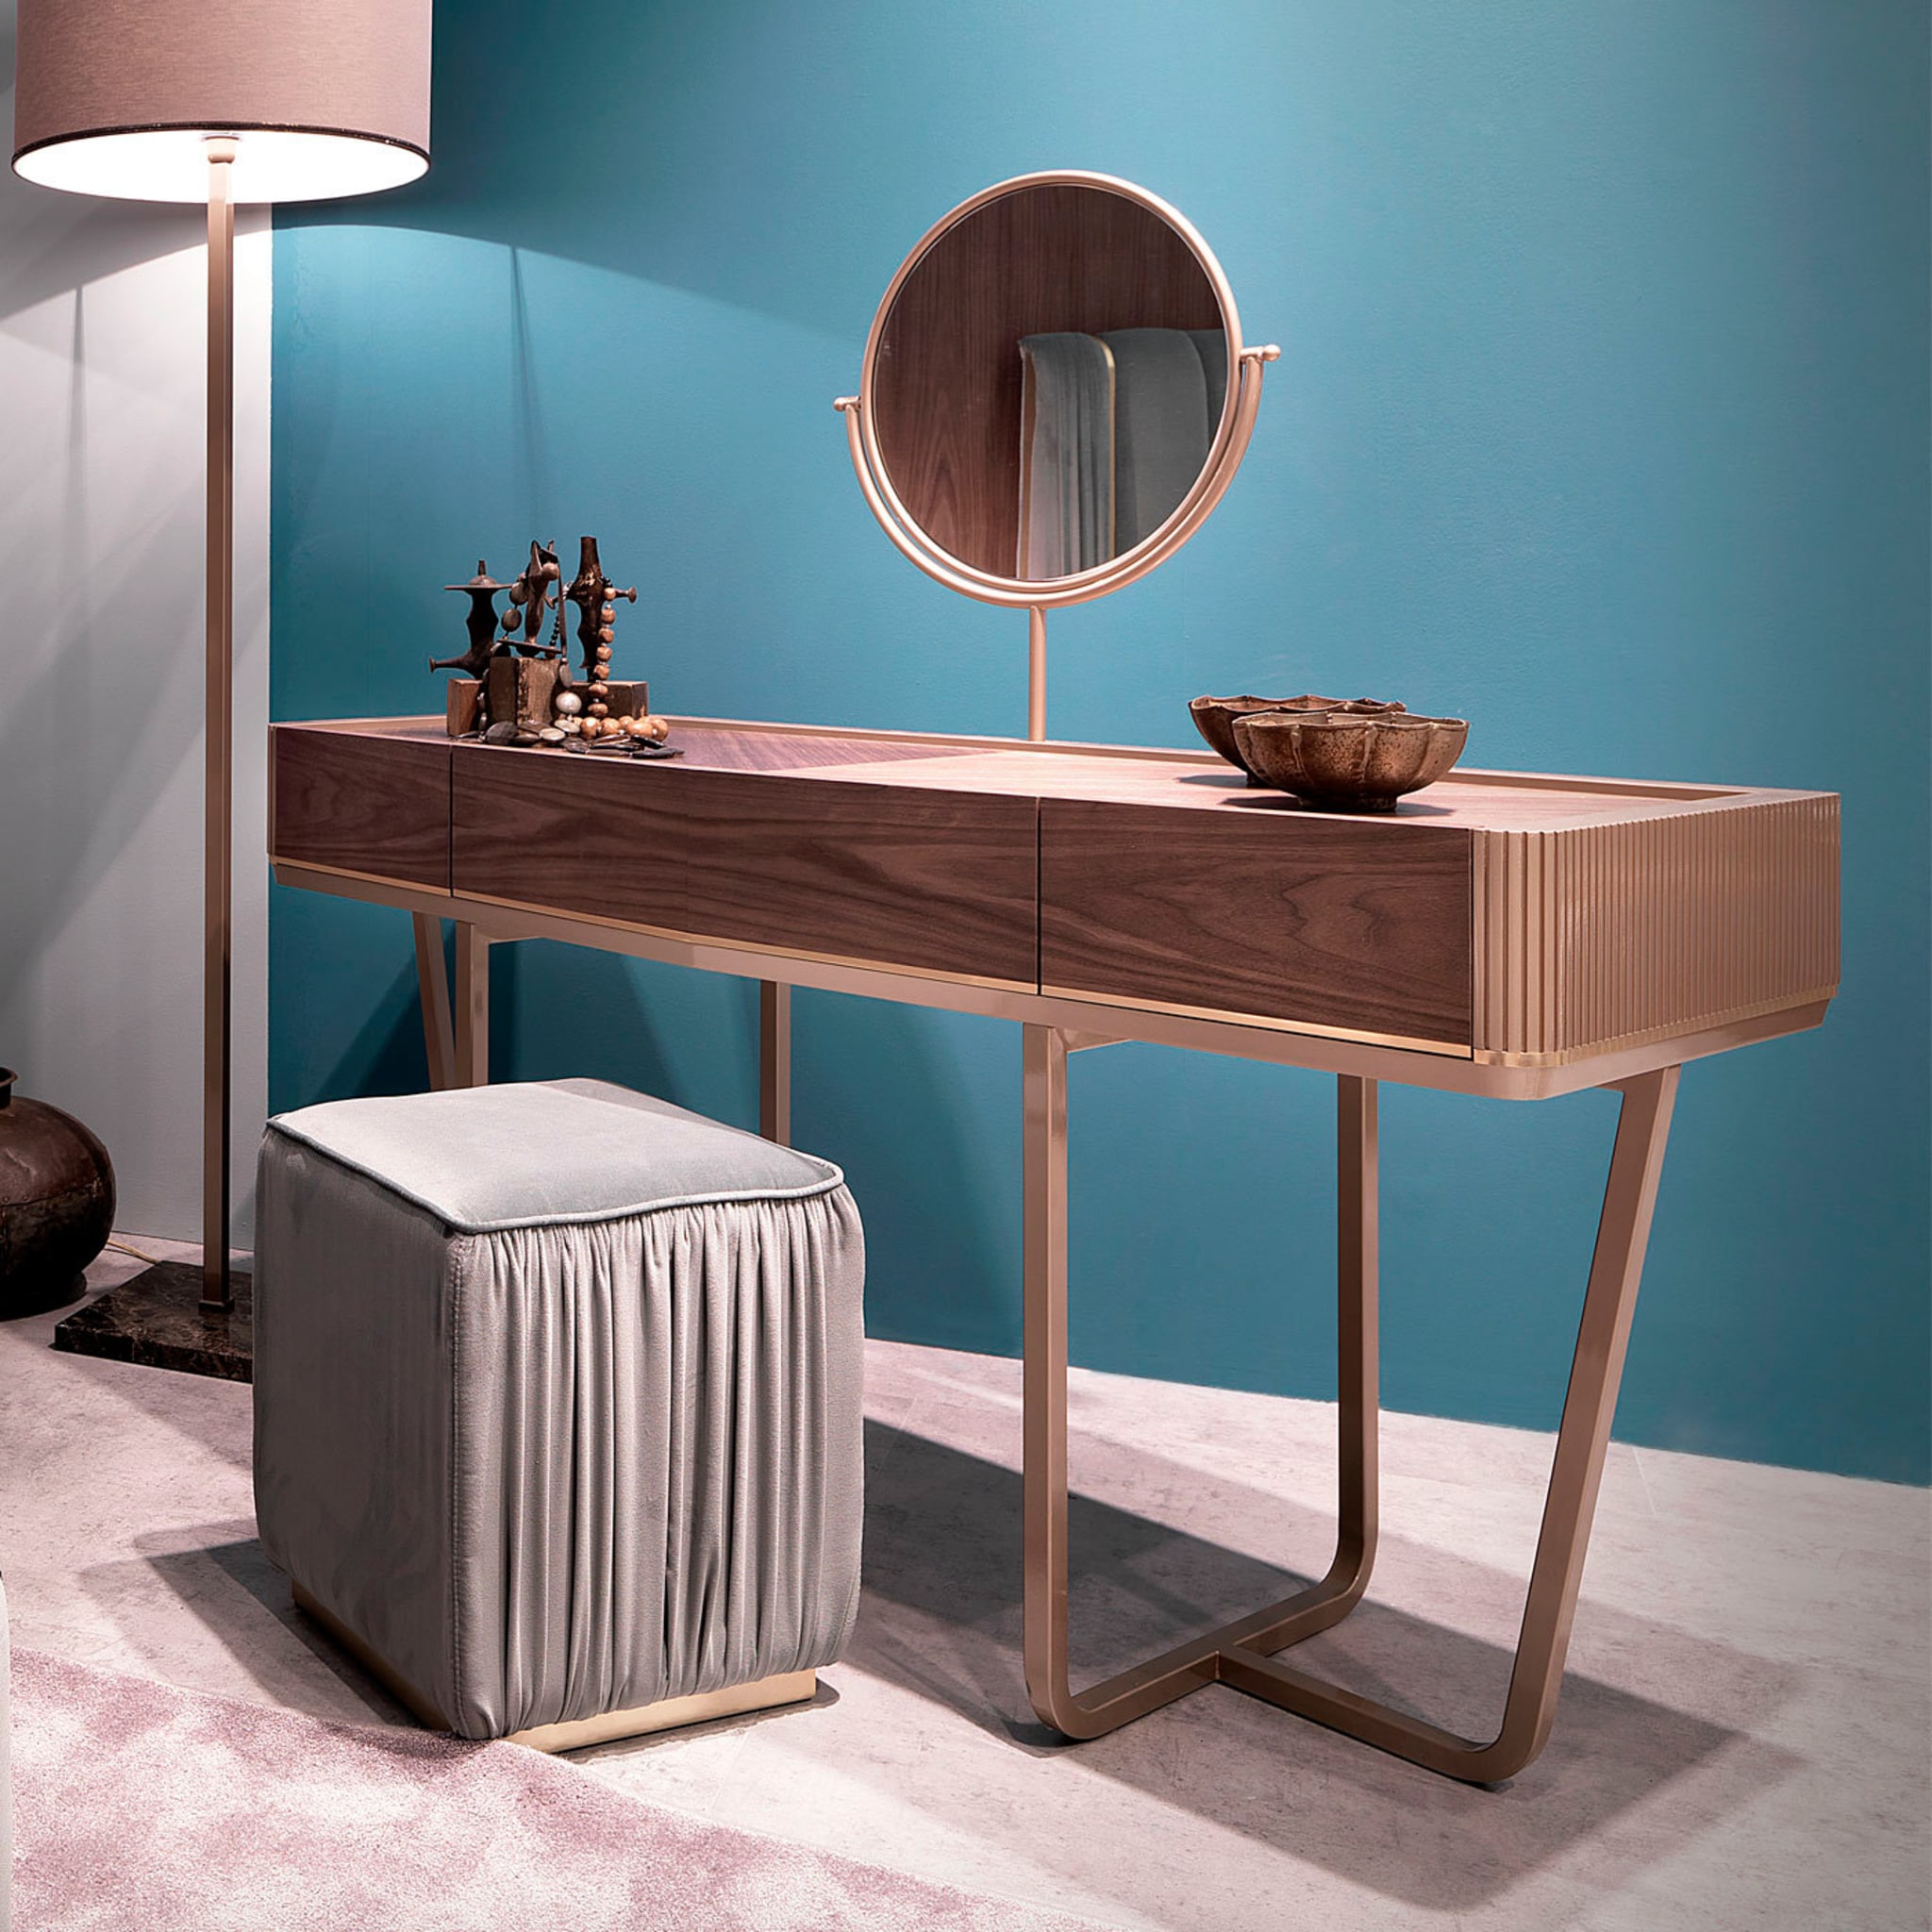 Beverly Canaletto Vanity Desk by Silvano Del Guerra - Alternative view 3